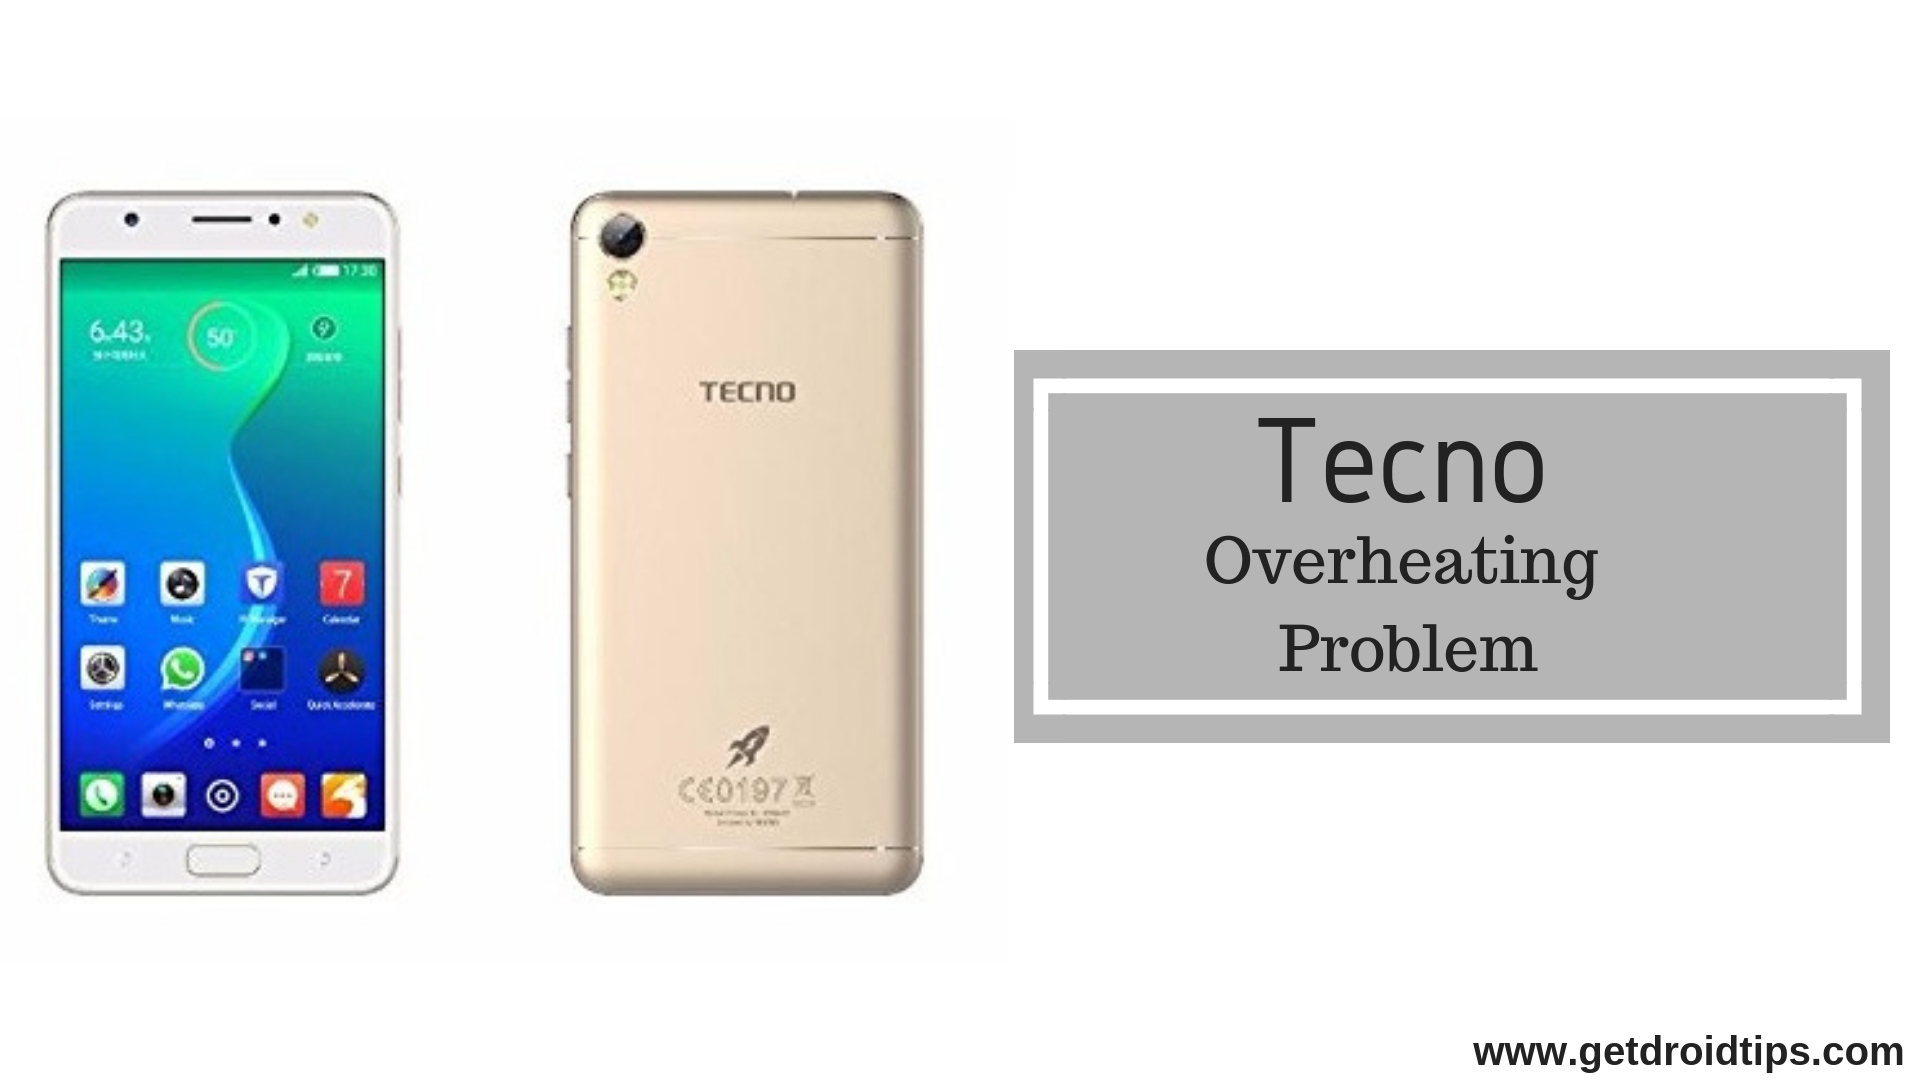 How To Fix Tecno Overheating Problem - Troubleshooting Fix & Tips